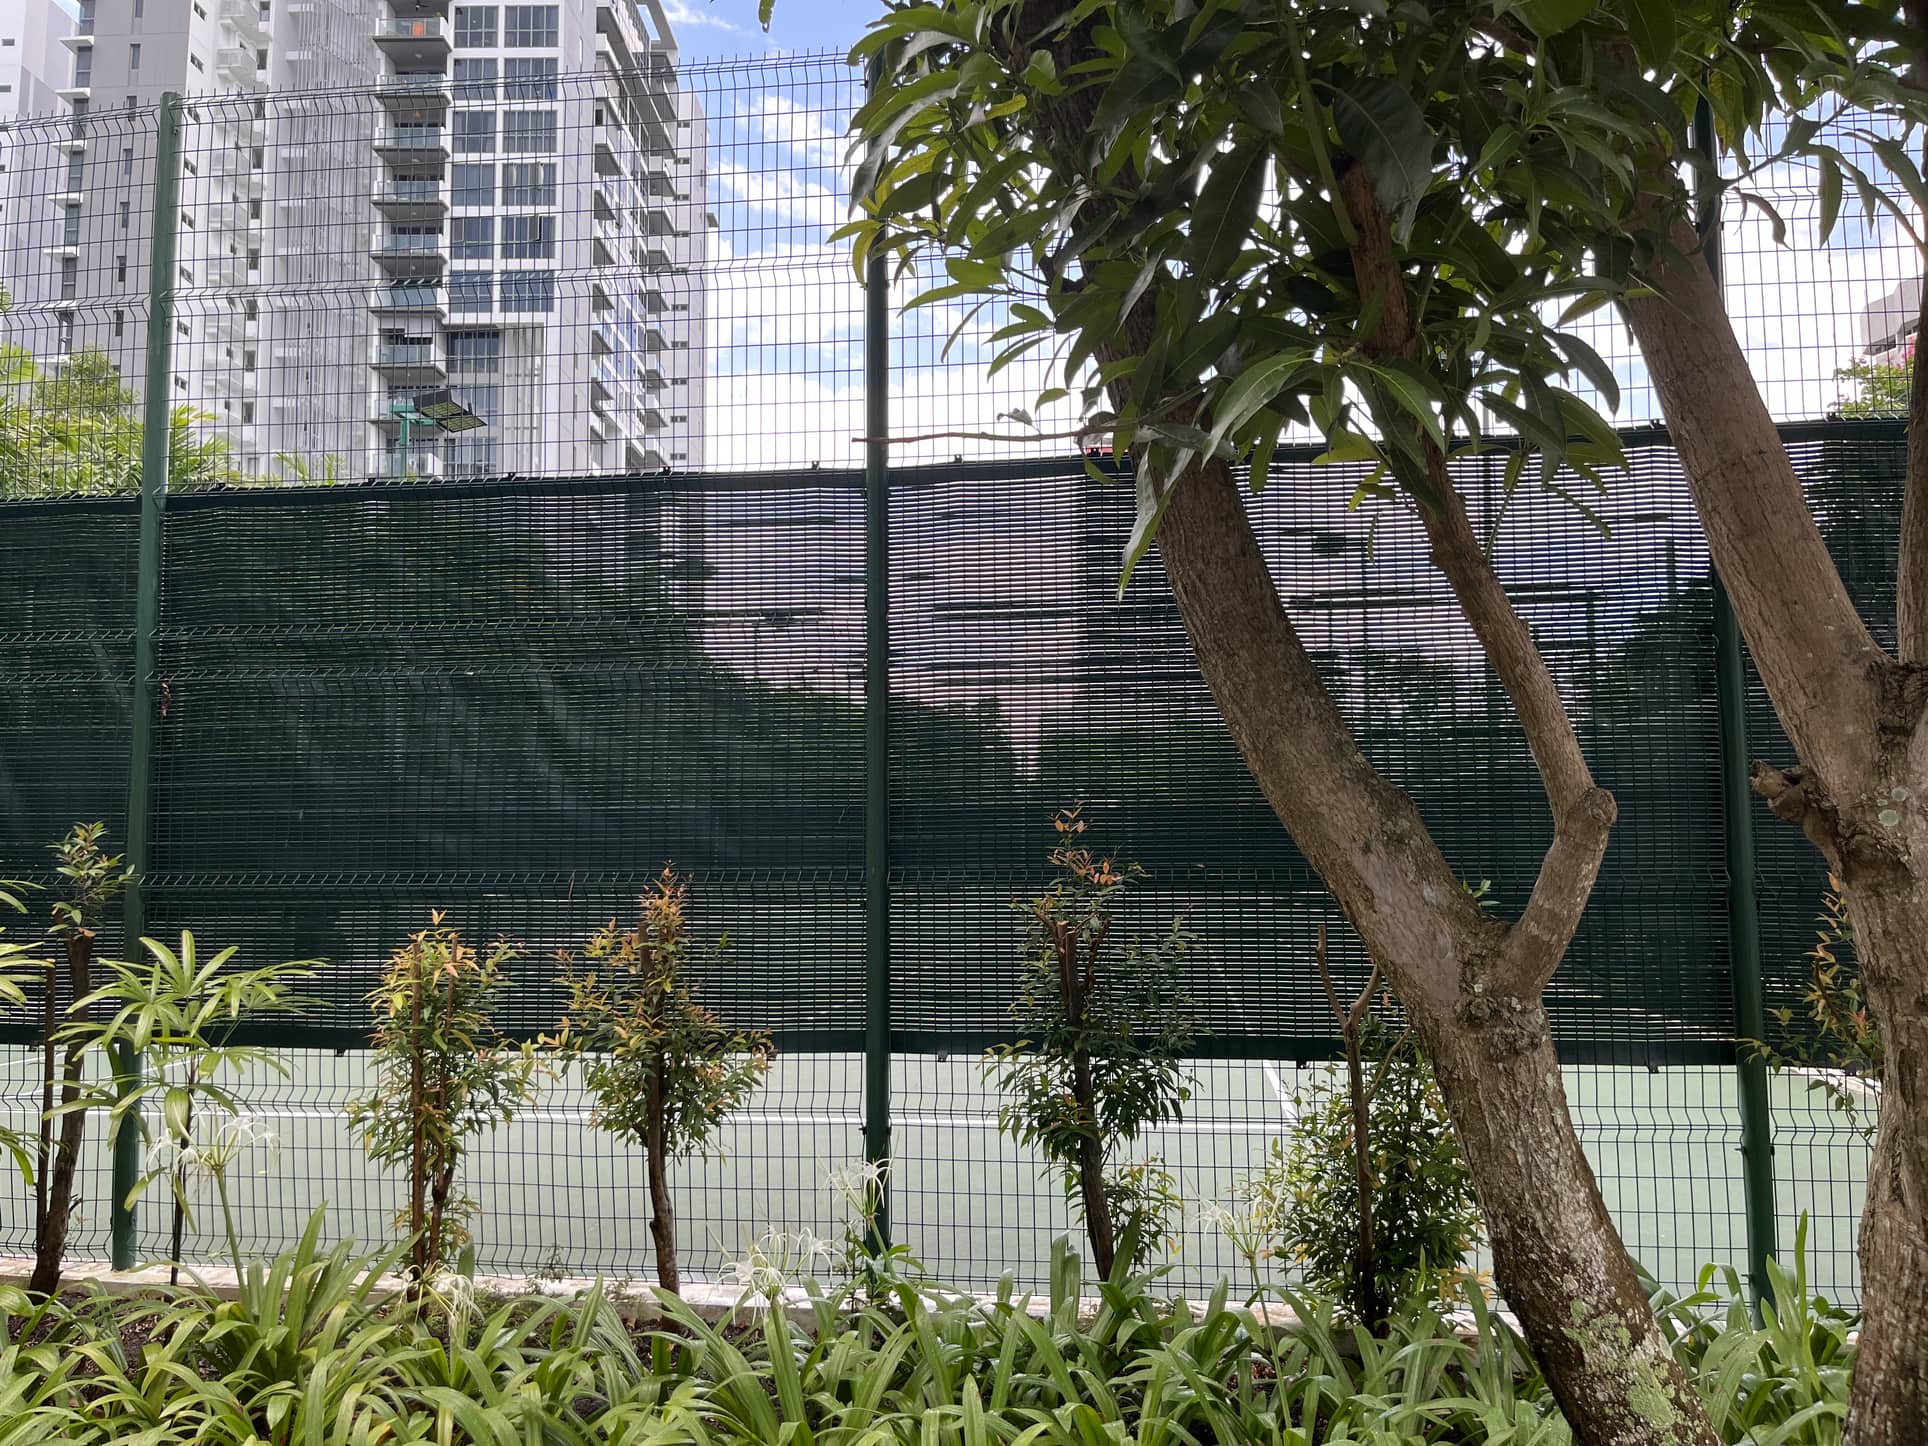 The Seaview Tennis Court 1